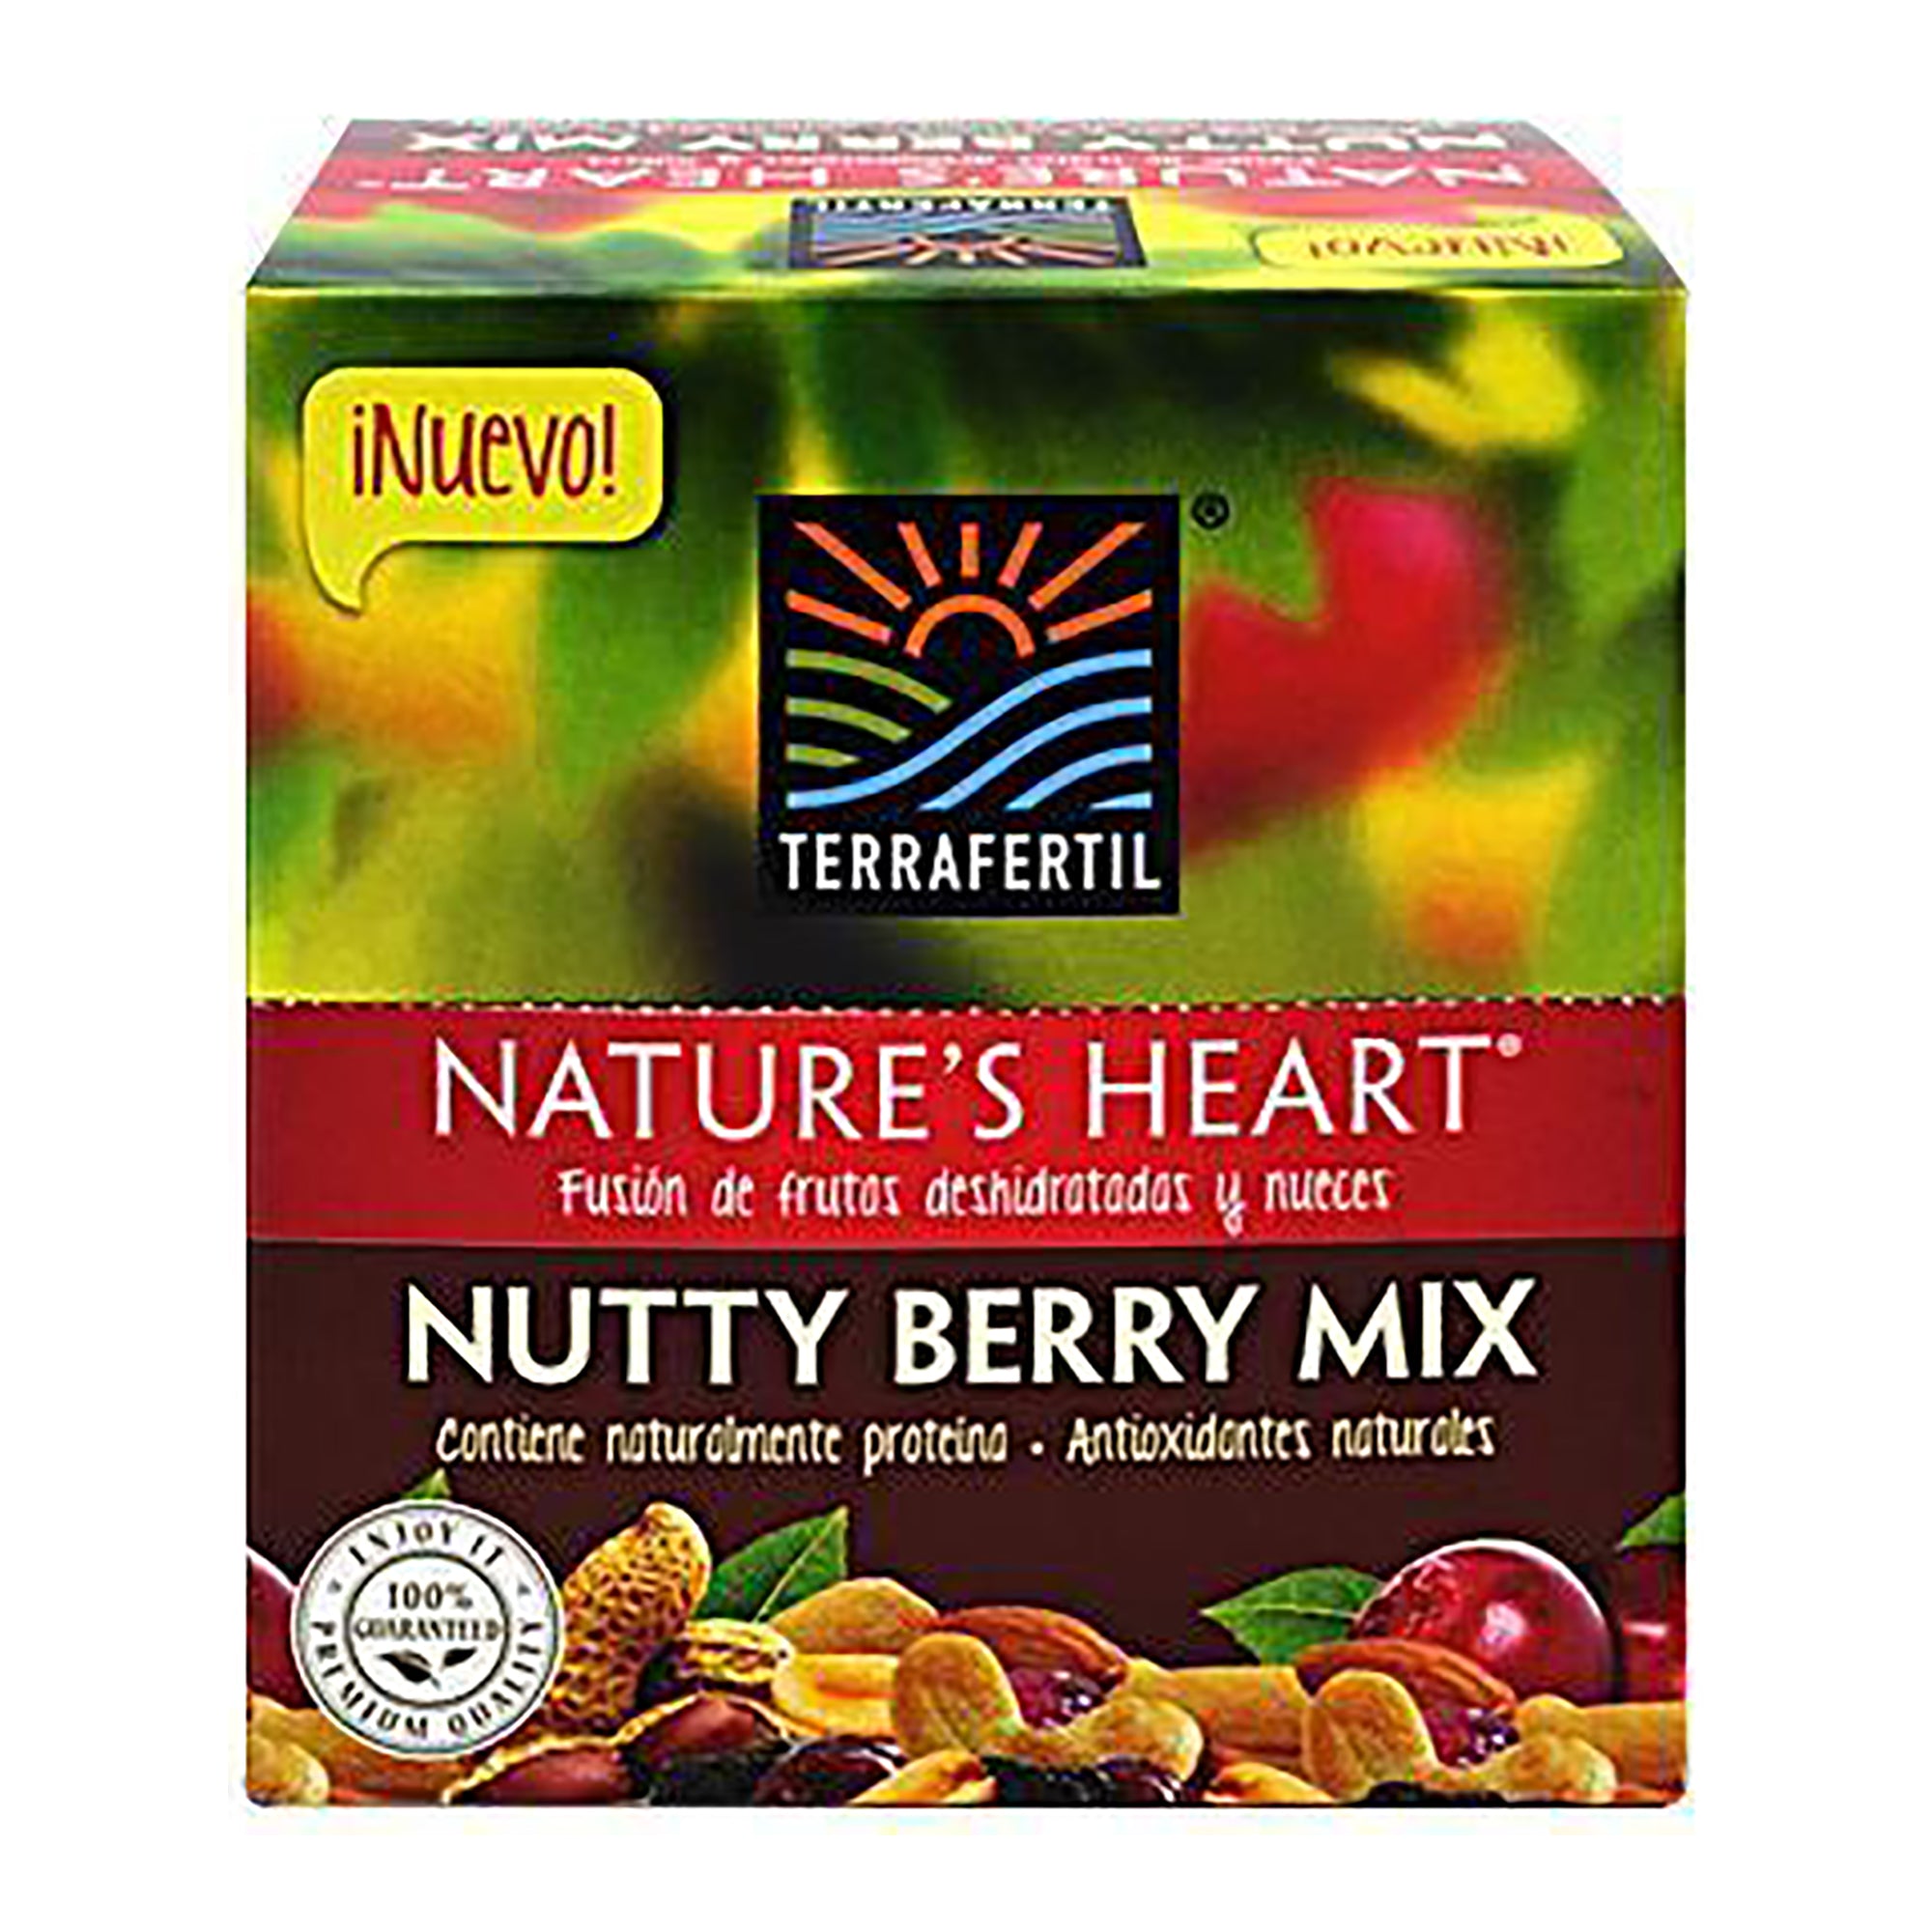 Nutty berry mix 35 g (PAQUETE 12)